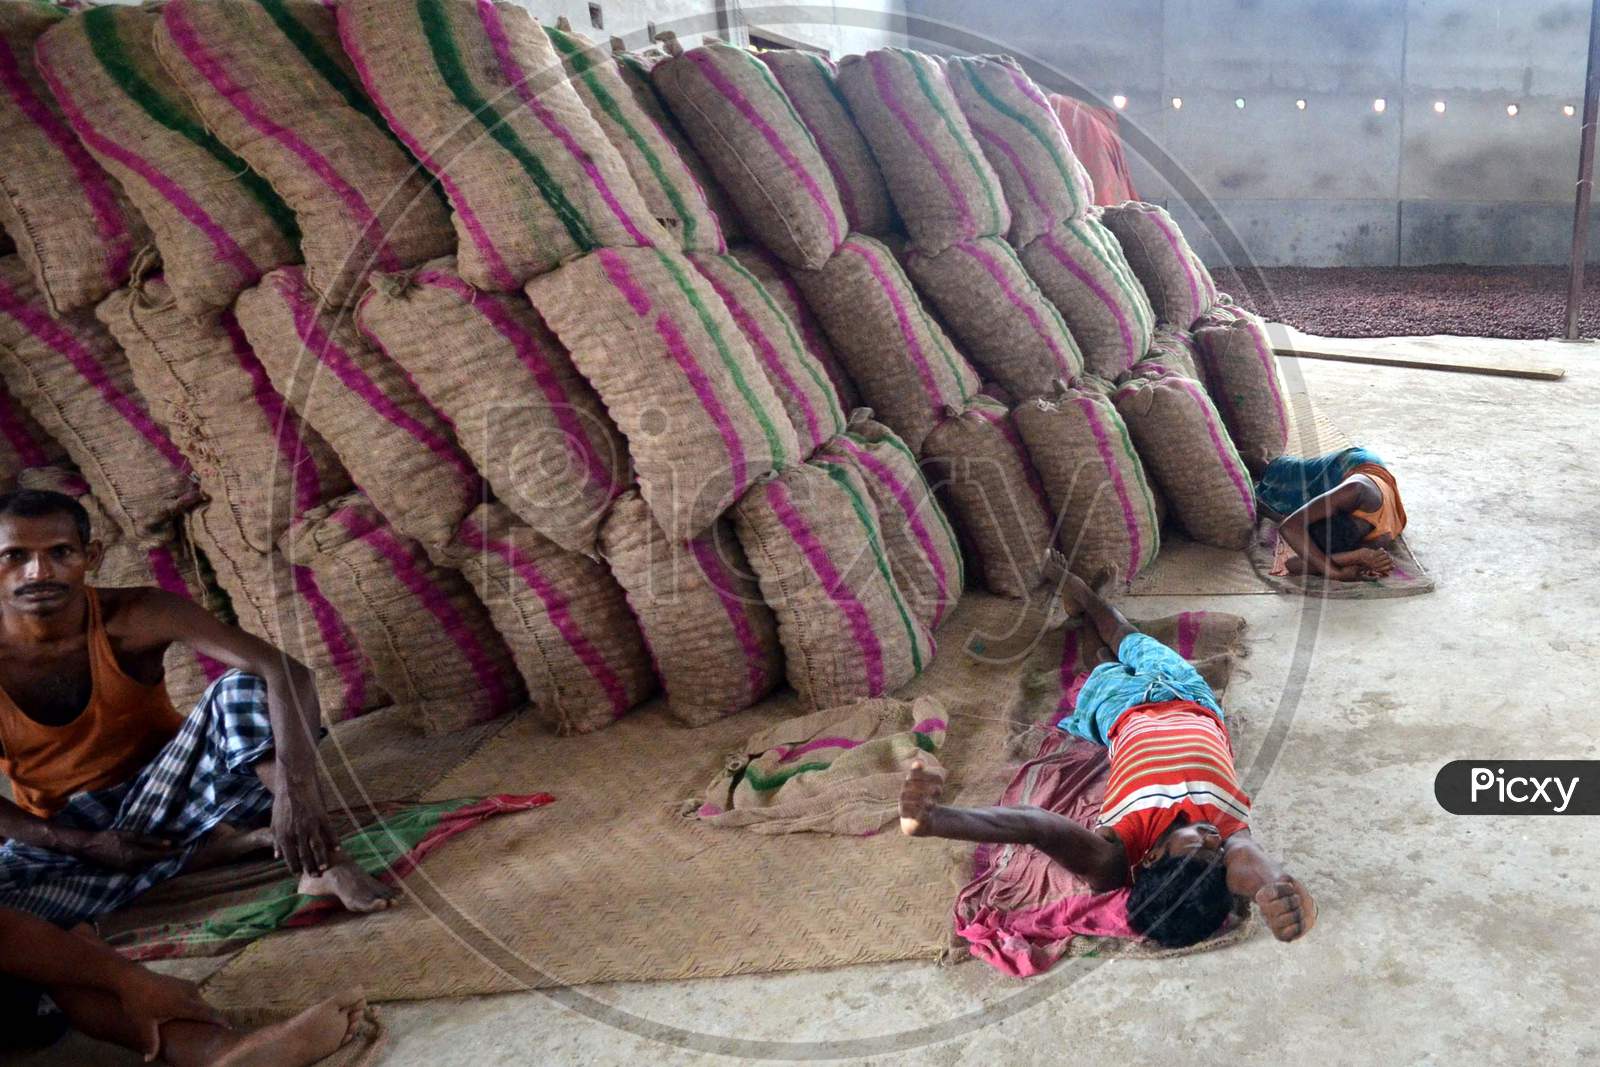 Daily Labor Workers in an Onion Storage House With Onion Bags in Nagaon, Assam